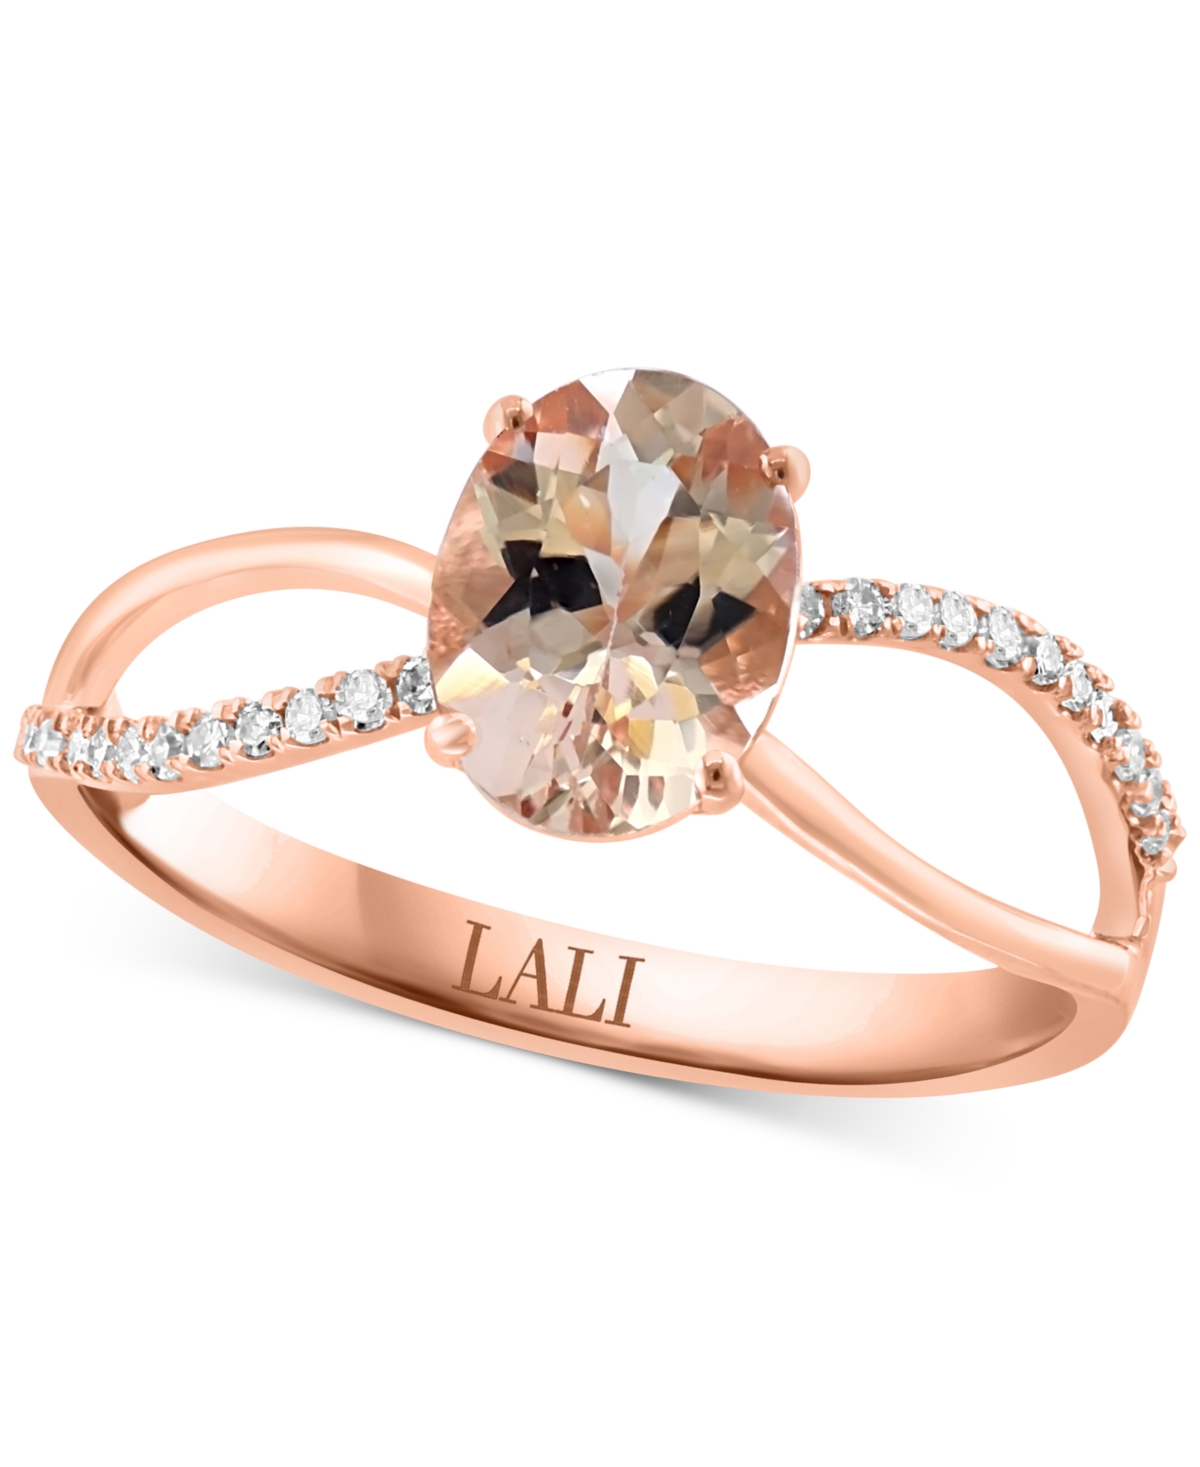 Lali Jewels Morganite (1 ct. t.w.) & Diamond Accent Ring in 14k Rose Gold